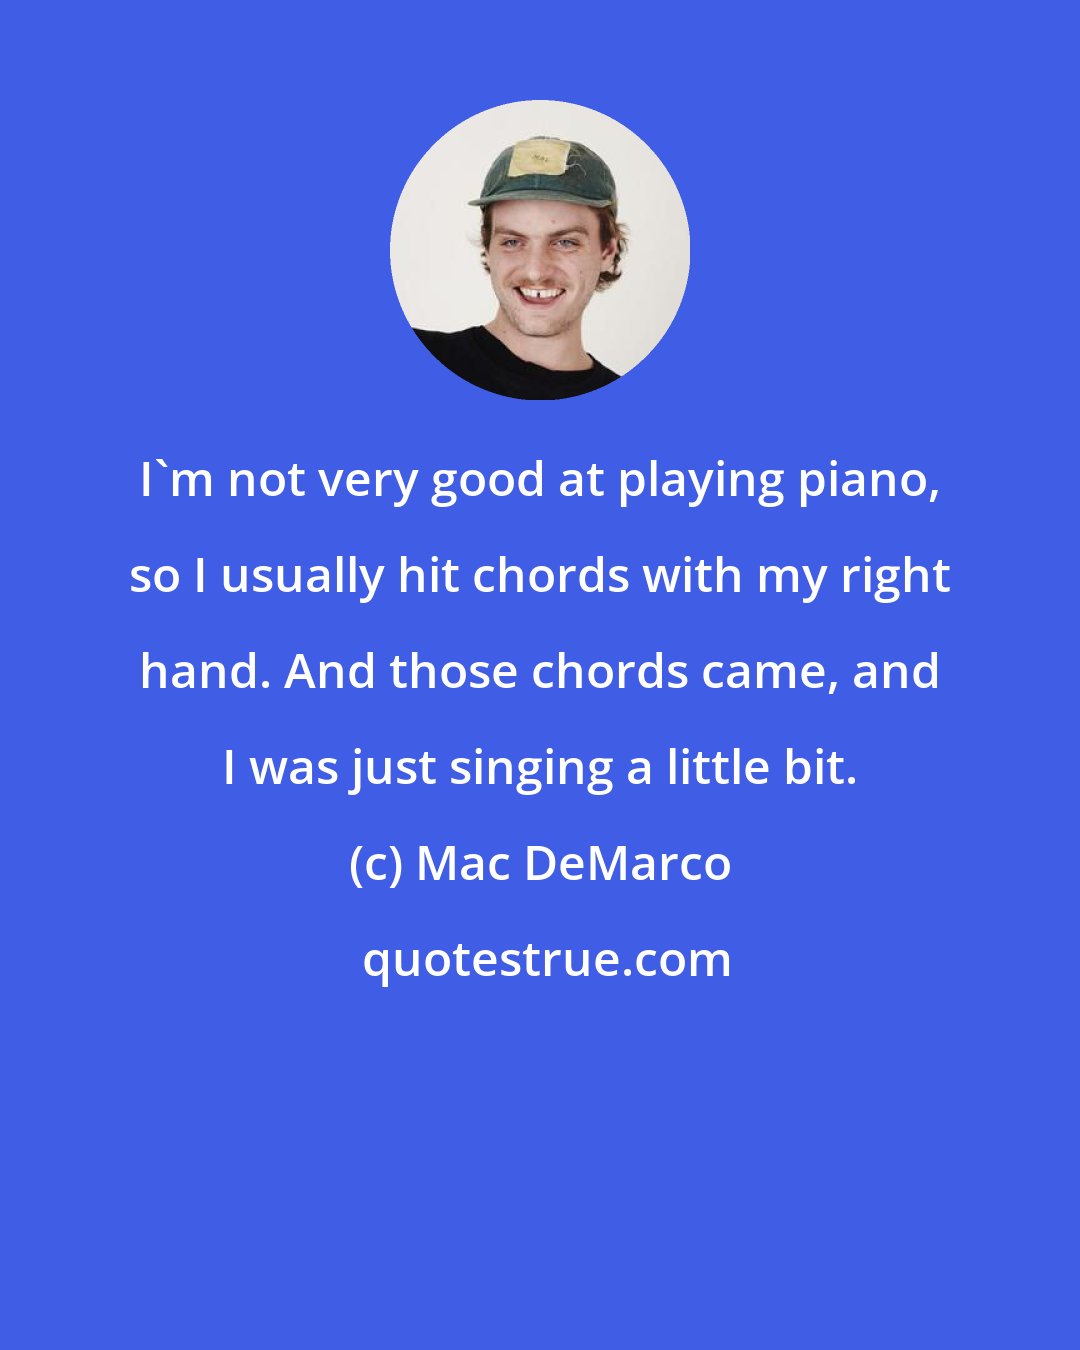 Mac DeMarco: I'm not very good at playing piano, so I usually hit chords with my right hand. And those chords came, and I was just singing a little bit.